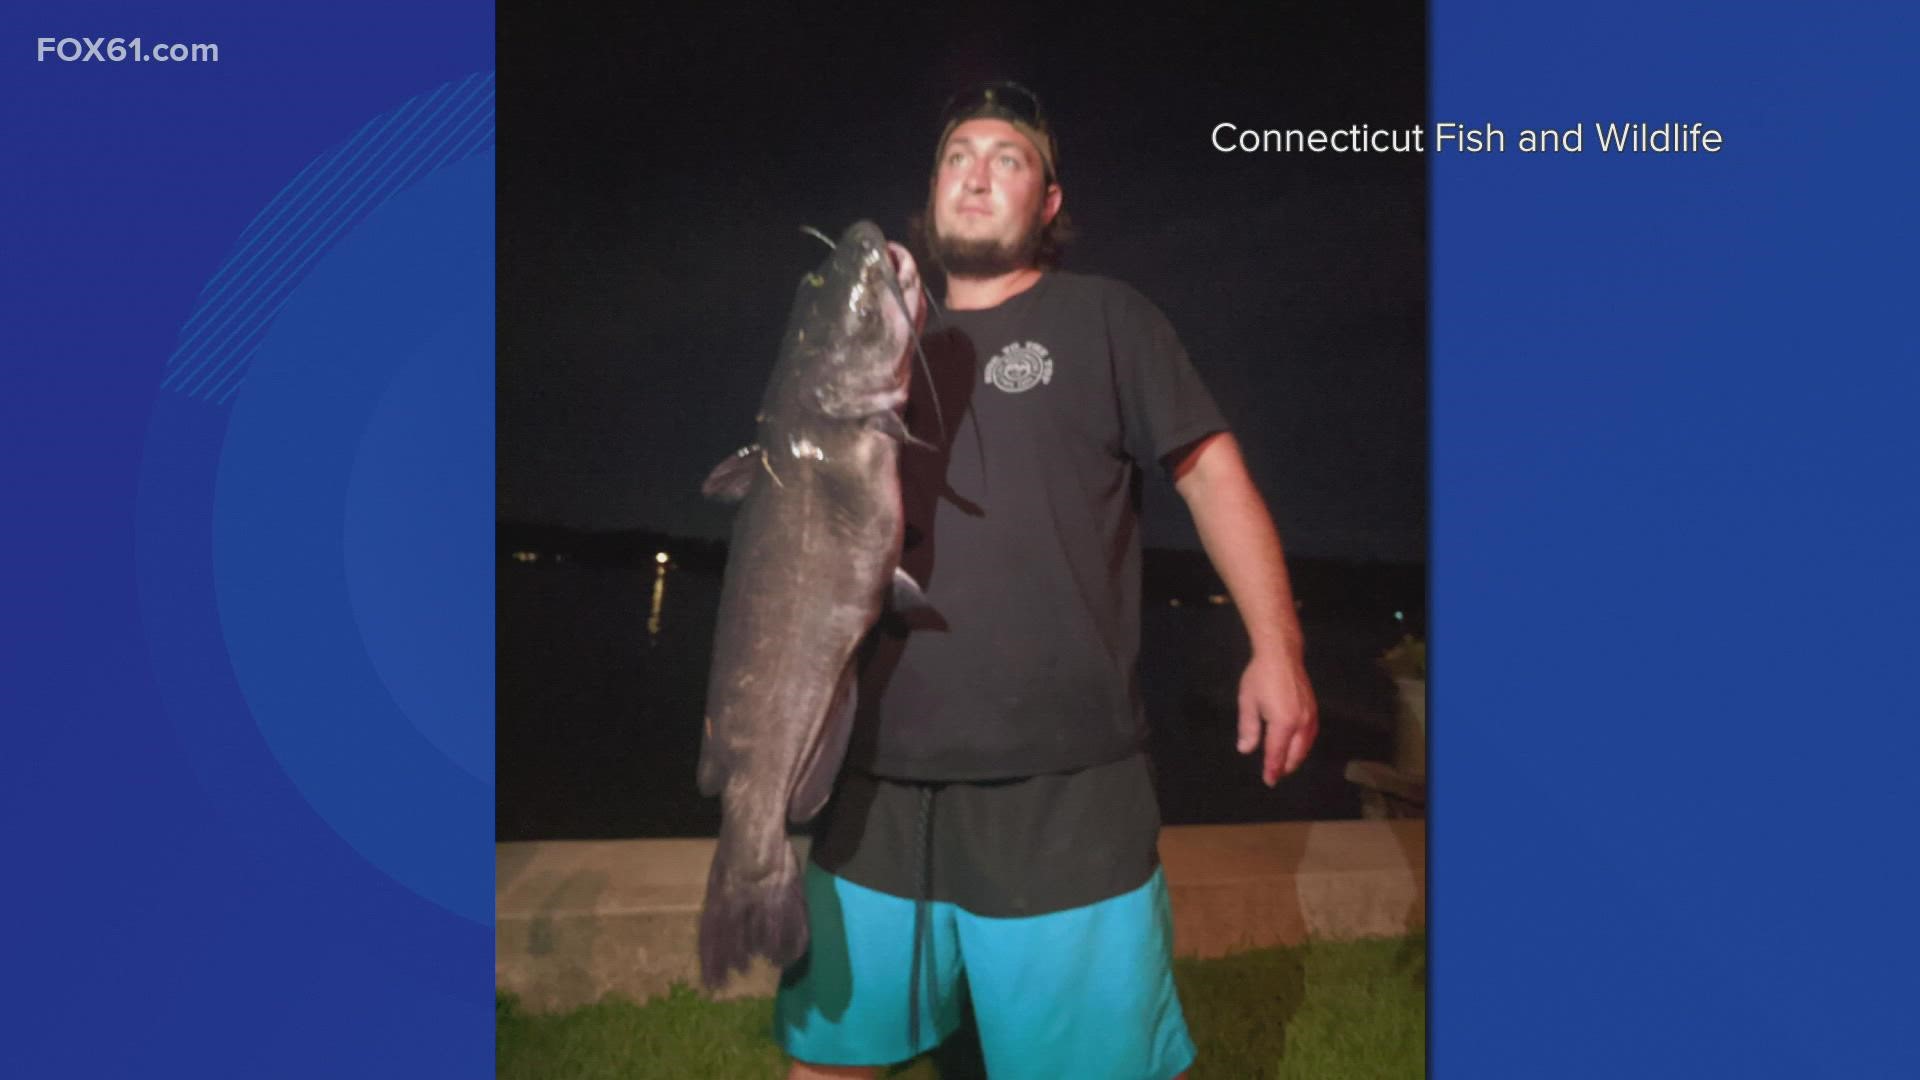 The fish weighed 21.3 pounds and was more than 3 feet long, easily breaking the previous state record, but DEEP officials said they needed to examine the actual fish